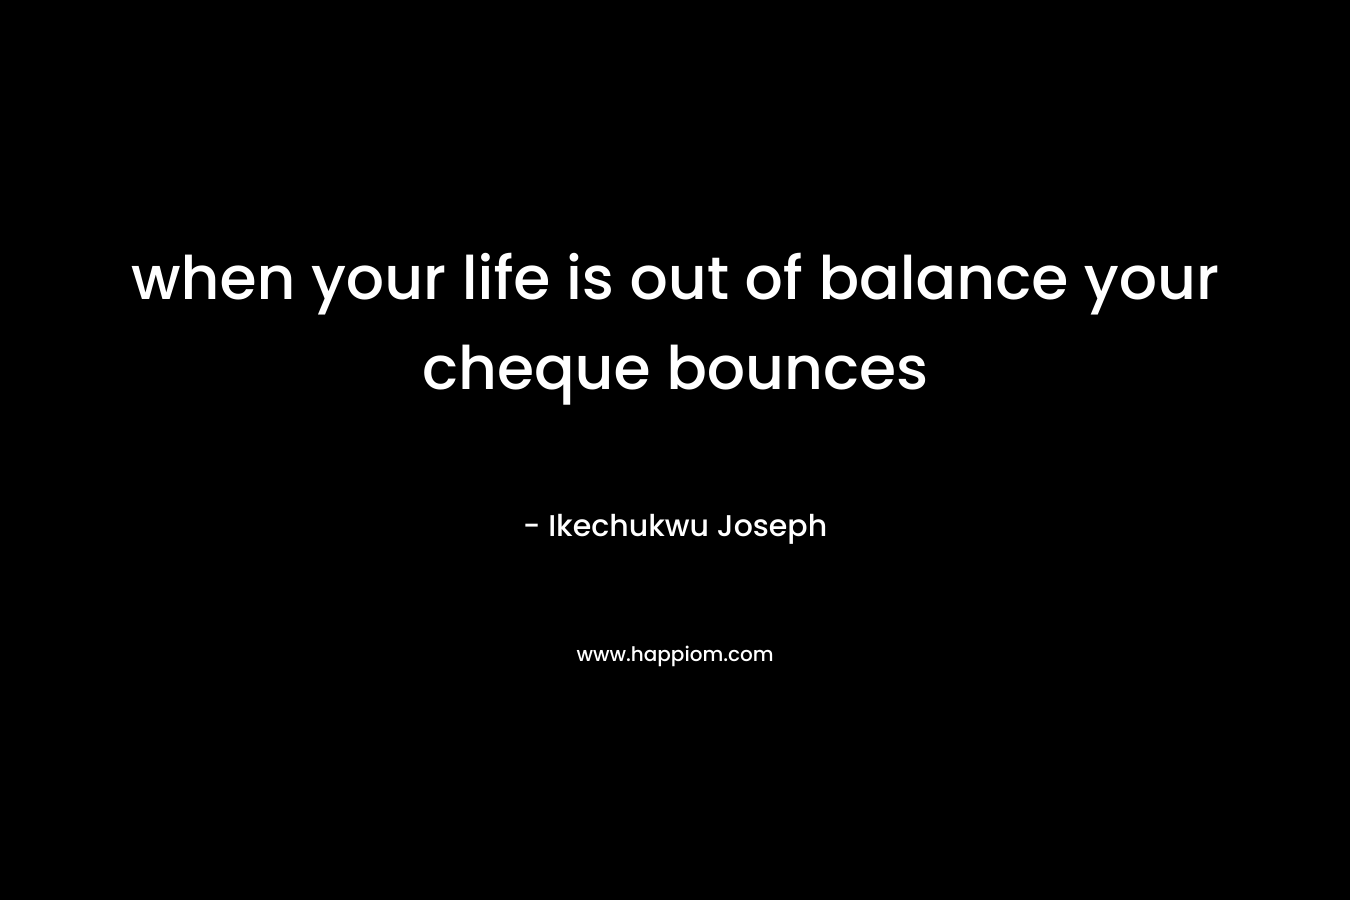 when your life is out of balance your cheque bounces – Ikechukwu Joseph